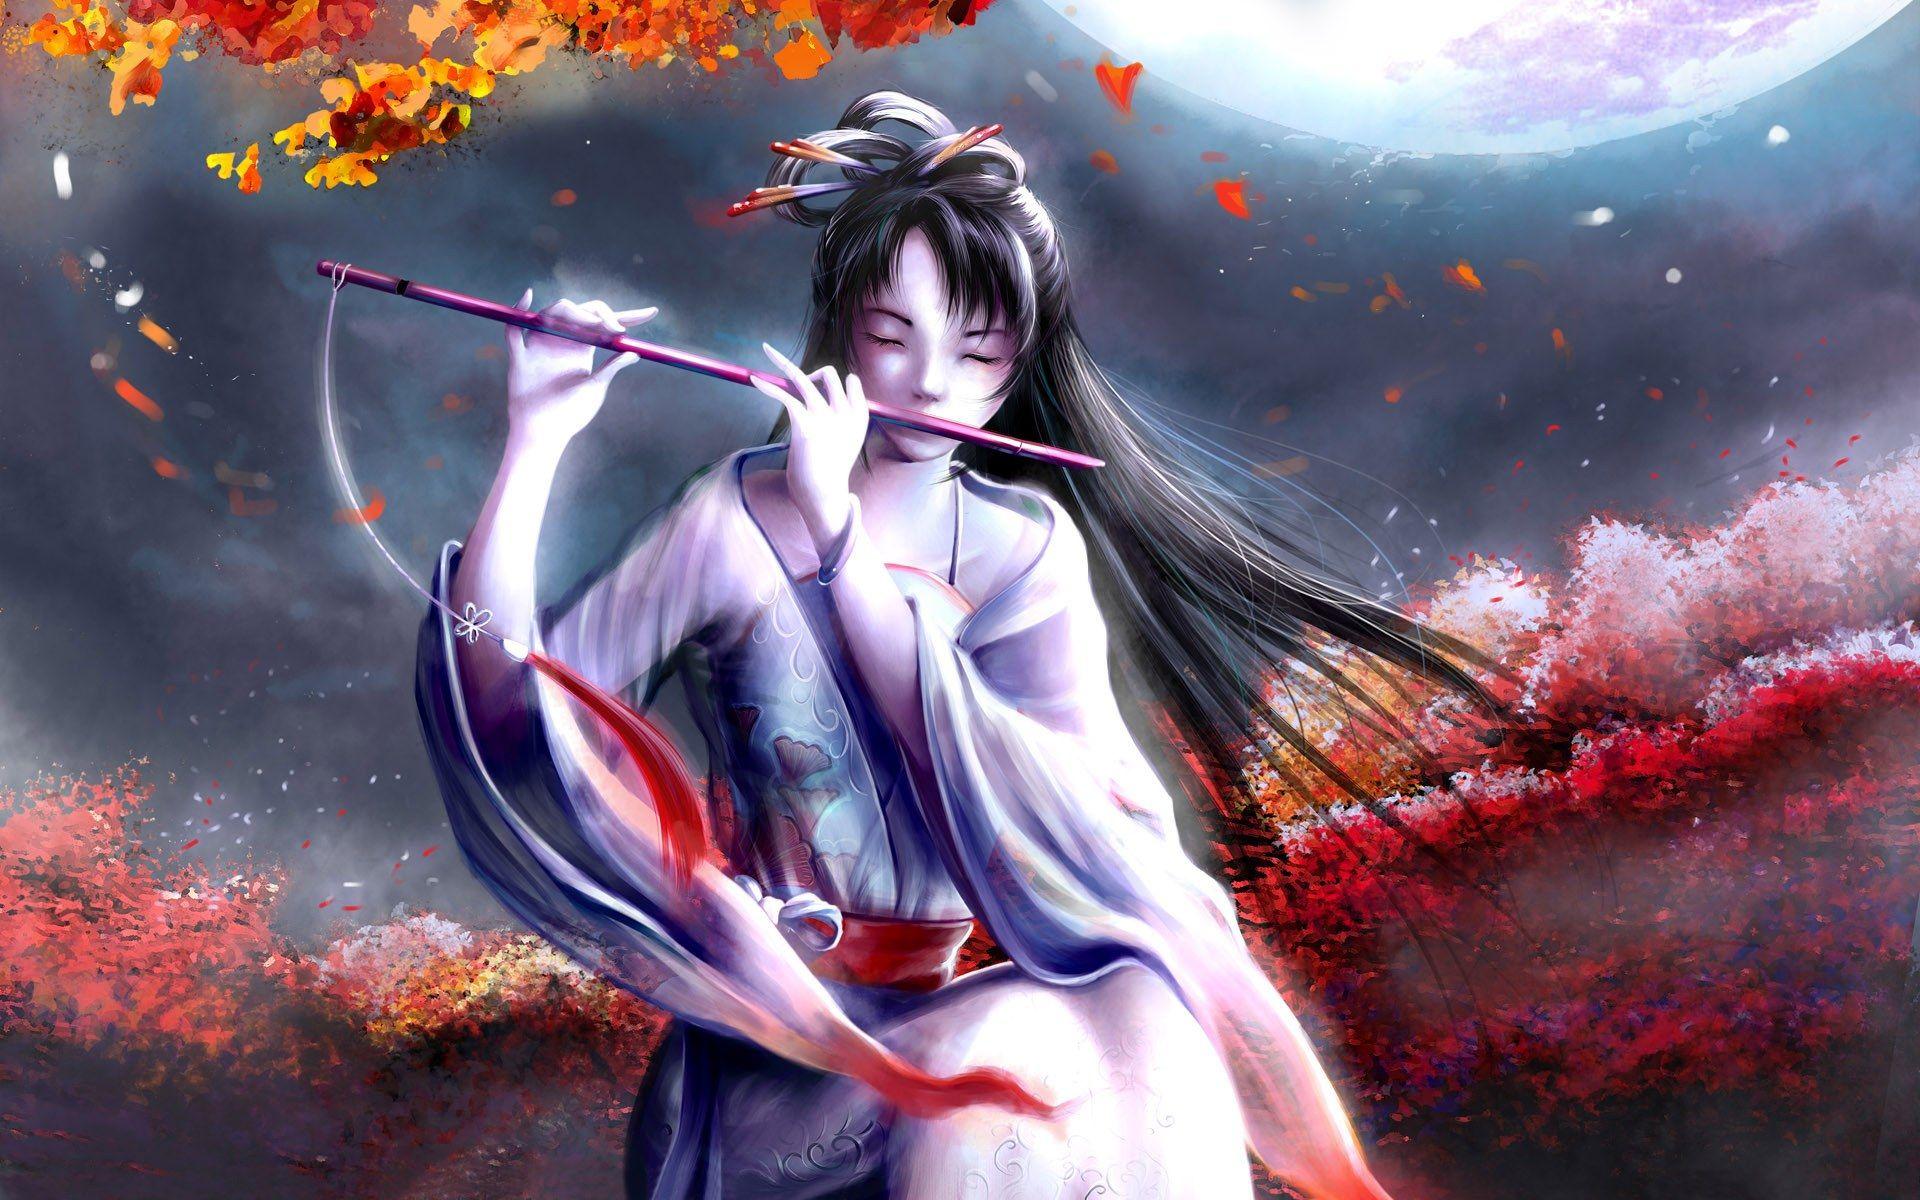 CHUANGDING Anime Illustration Poster Japanese Style Taoist Female Priest  Wall Art Picture Painting Poster Canvas Print Posters Artworks Bedroom  Living Room Decor 24x36inch(60x90cm) : Amazon.com.au: Home